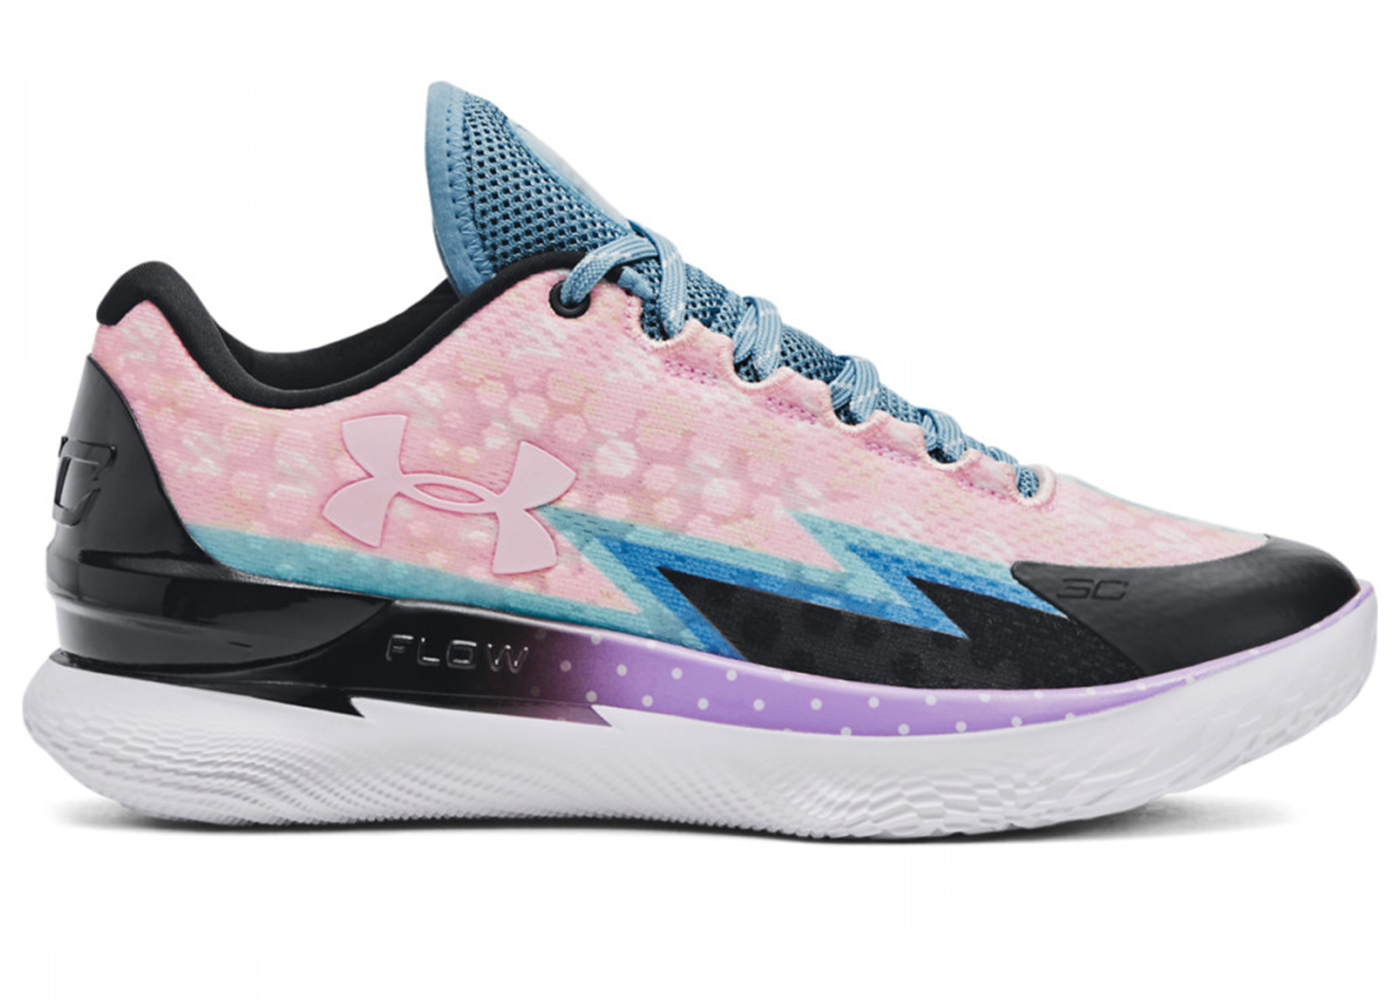 Under Armour Curry 1 Low FloTro Draft Day メンズ - 3026278-400 - JP